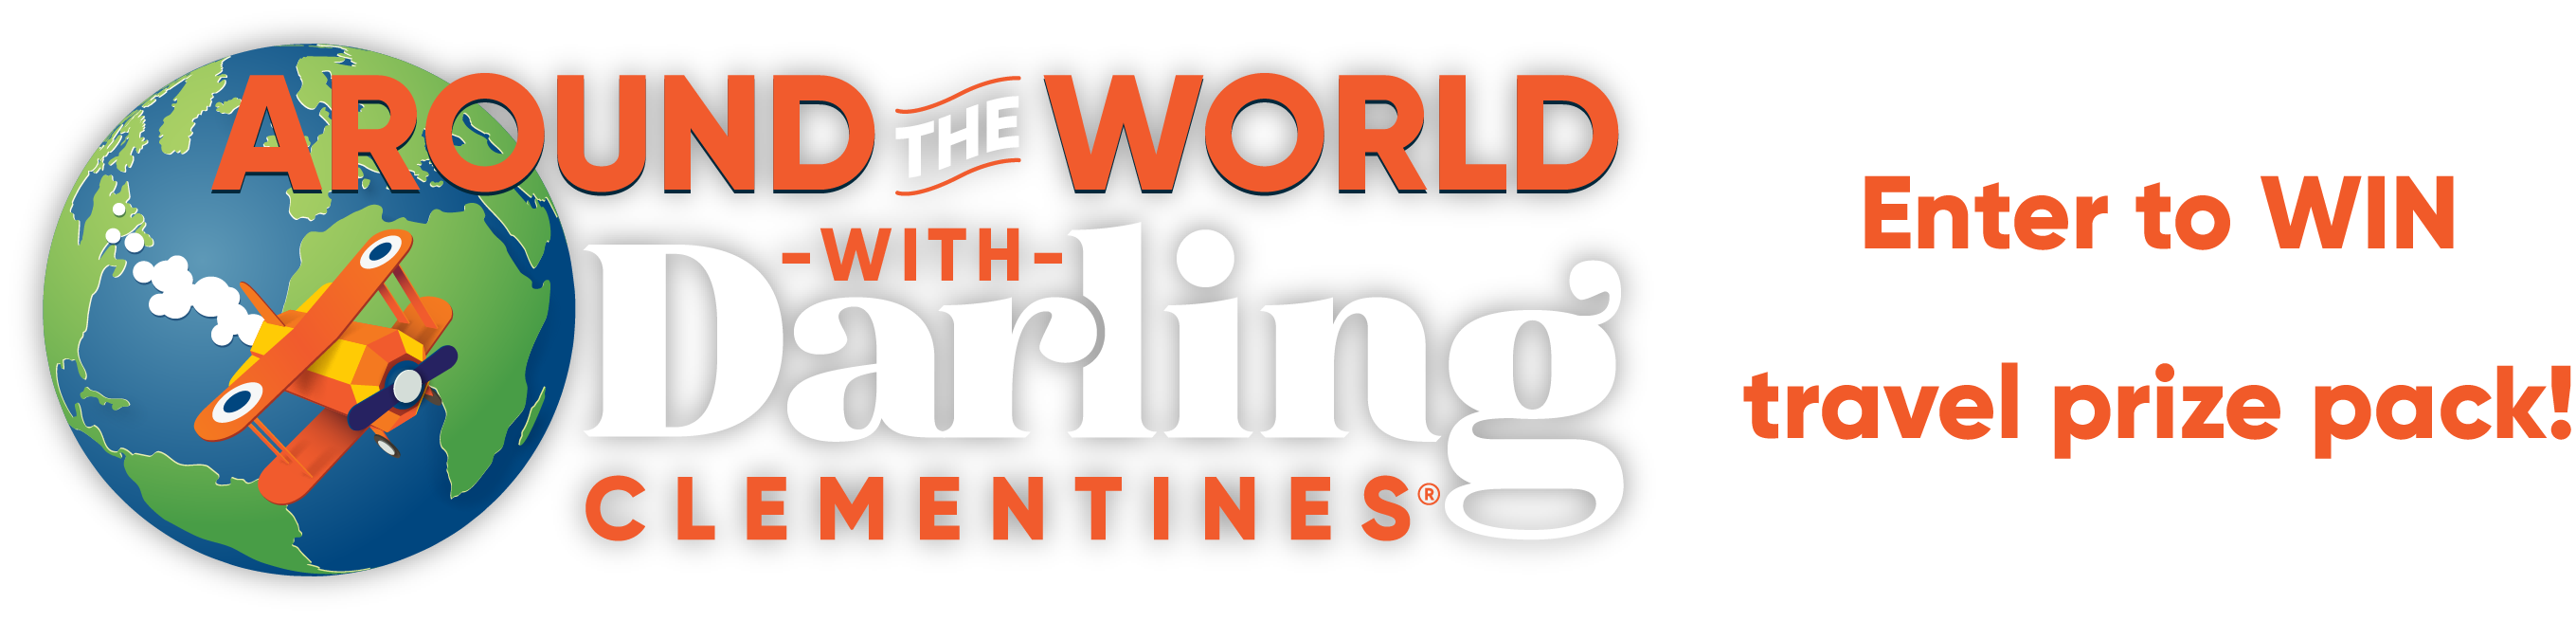 Around the World with Darling Clementines